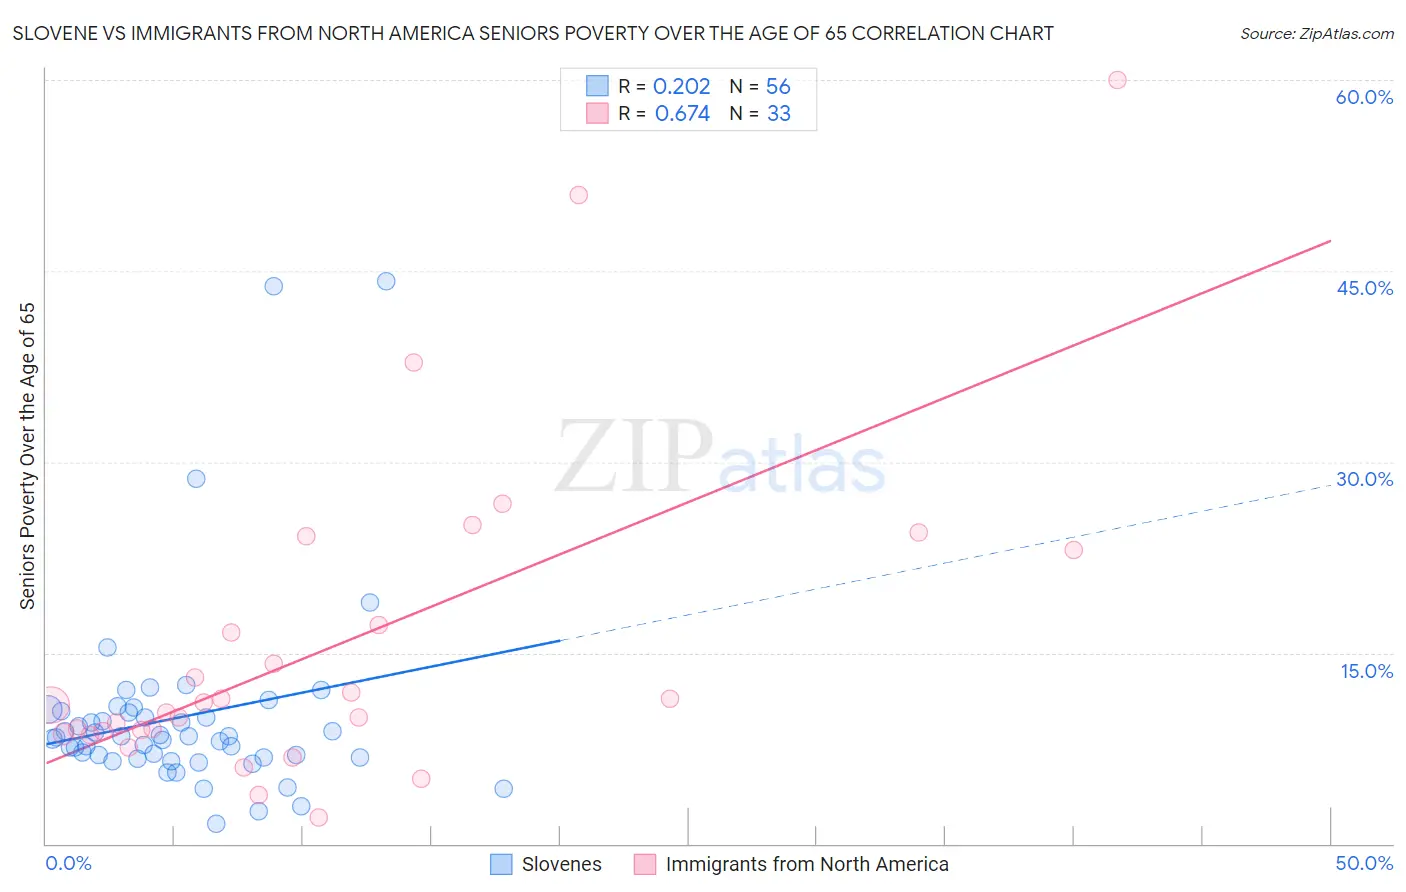 Slovene vs Immigrants from North America Seniors Poverty Over the Age of 65